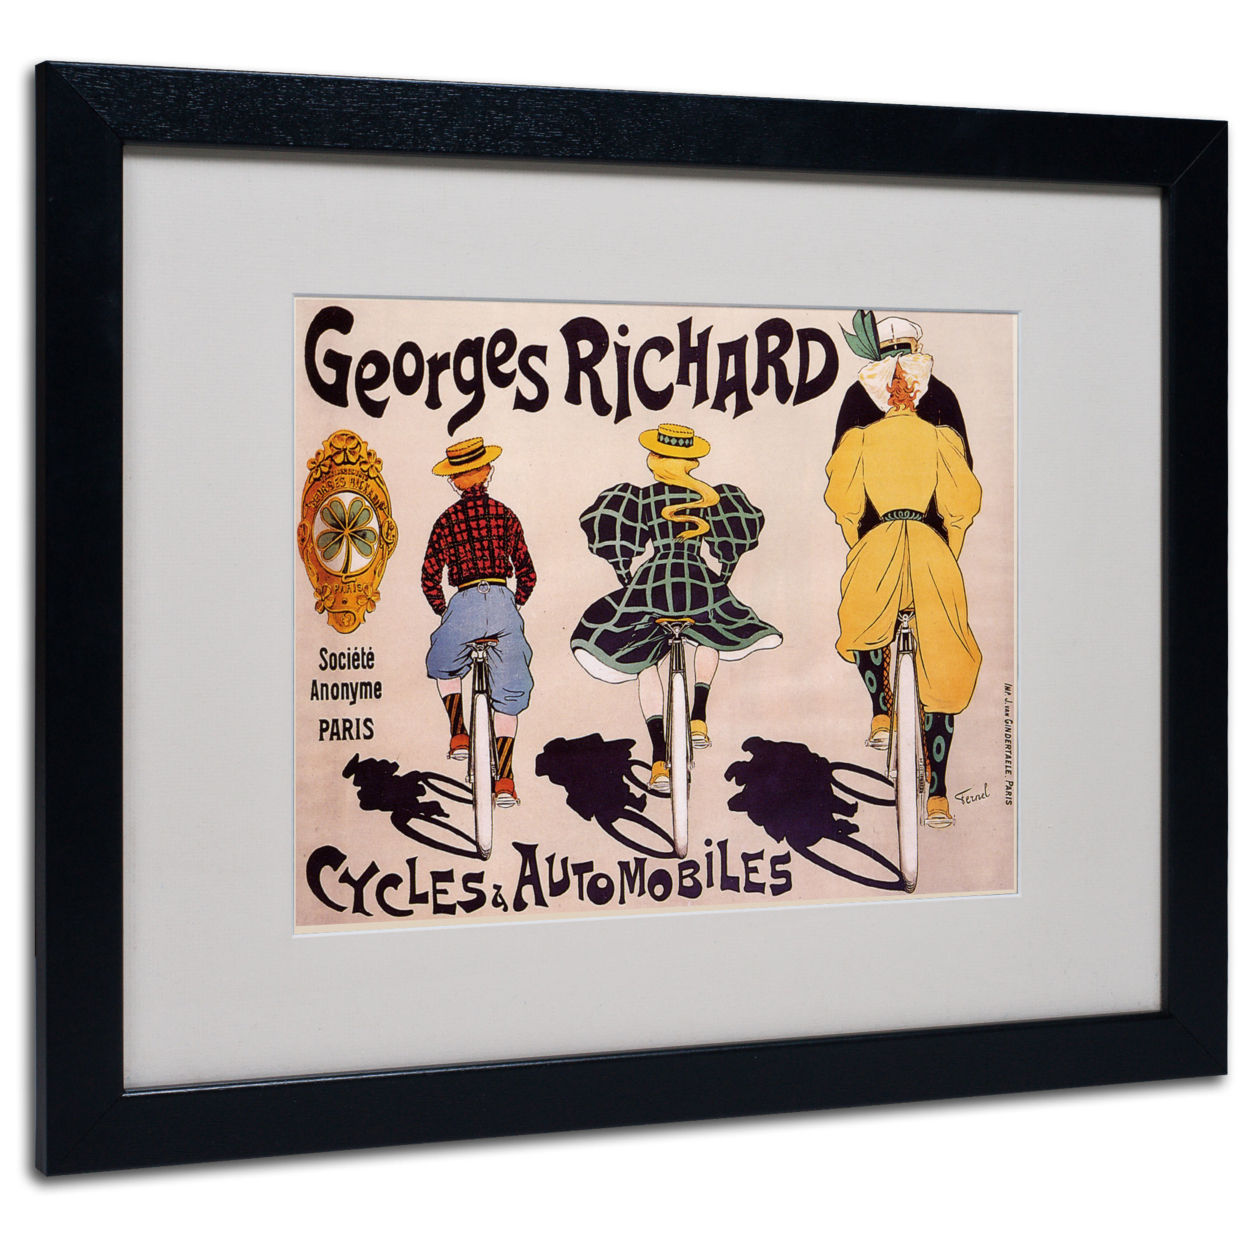 Georges Richard Cycles & Automobiles' Black Wooden Framed Art 18 X 22 Inches